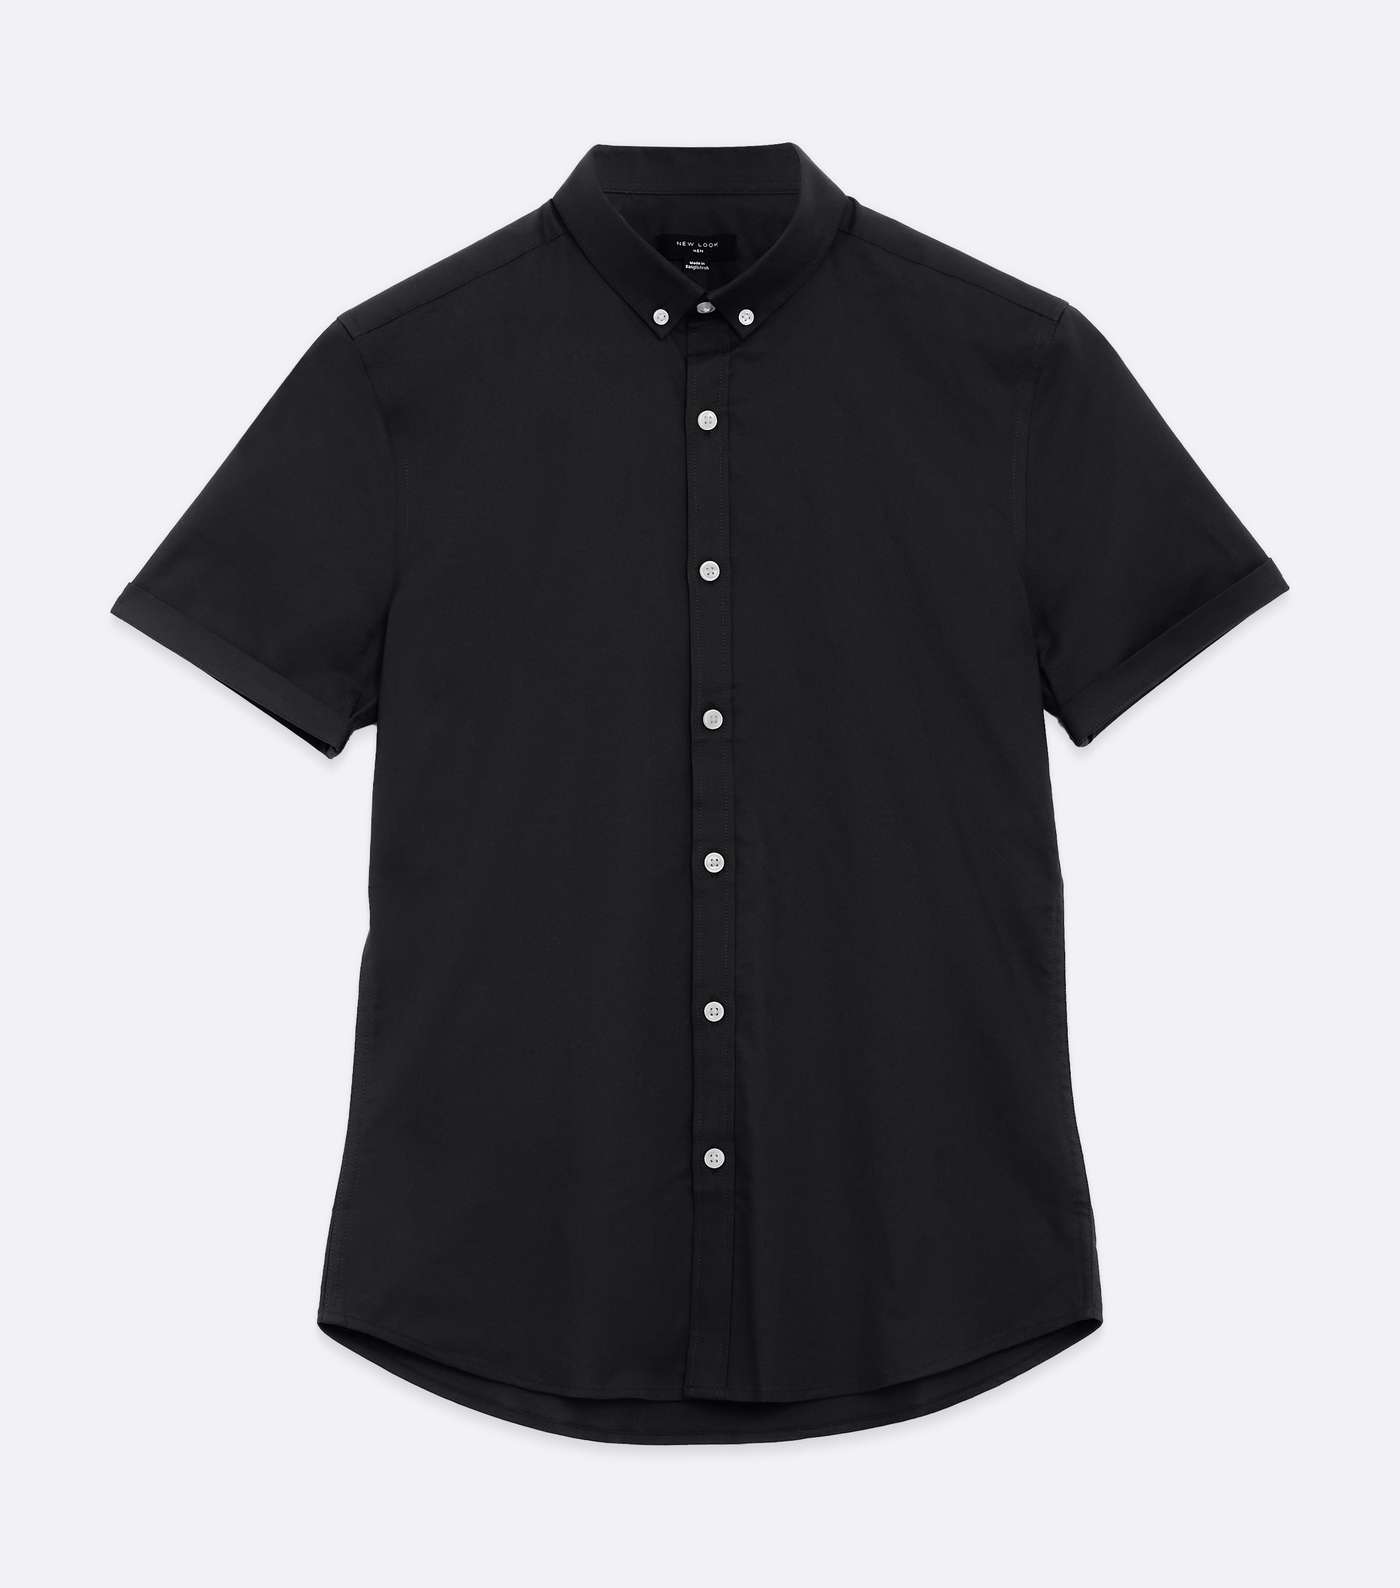 Black Short Sleeve Muscle Fit Oxford Shirt Image 5